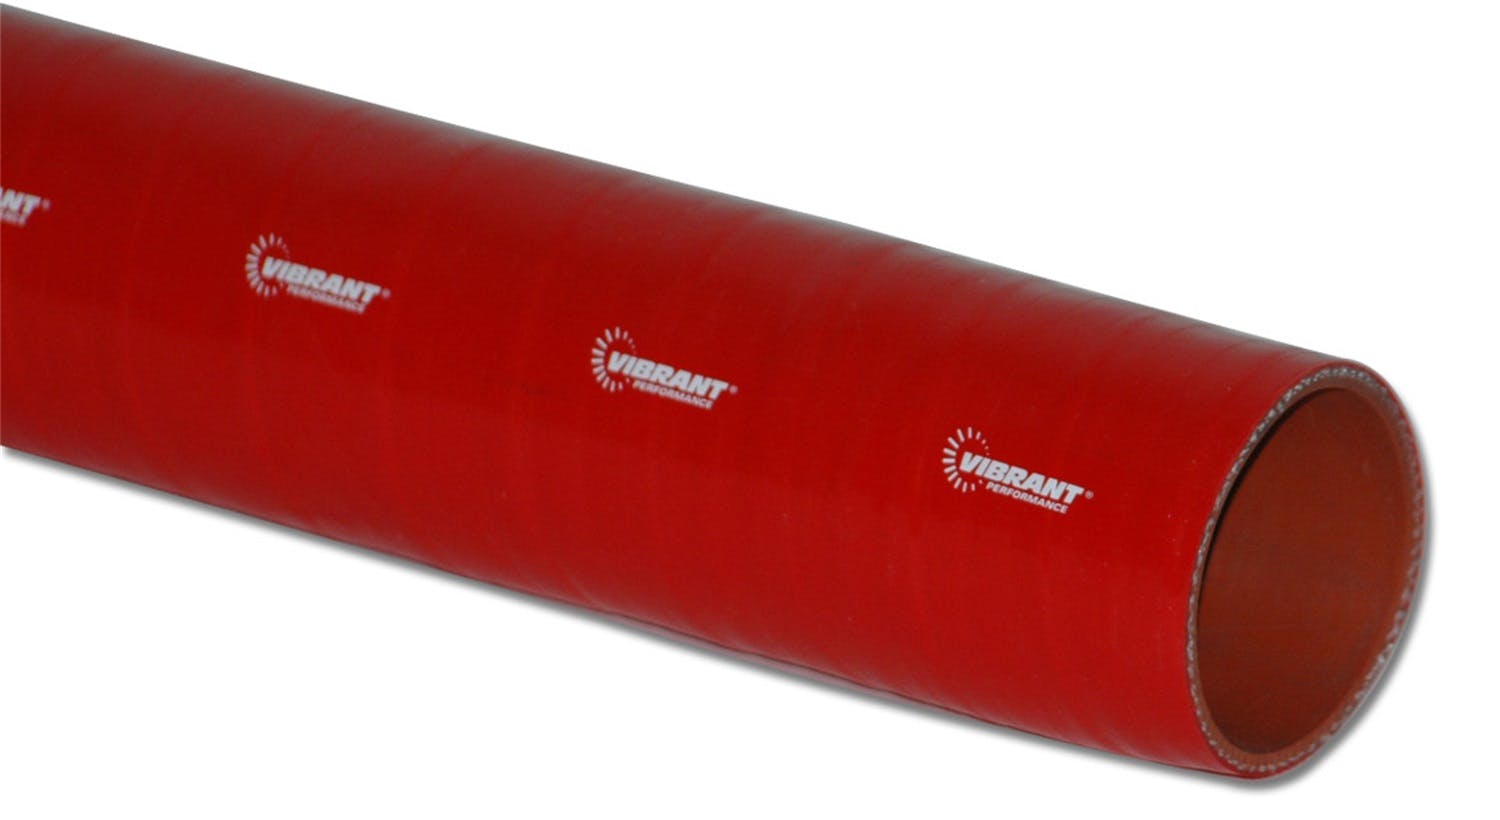 Vibrant Performance 27031R 4 Ply Silicone Sleeve, 1.5 inch I.D. x 12 inch Long - Red